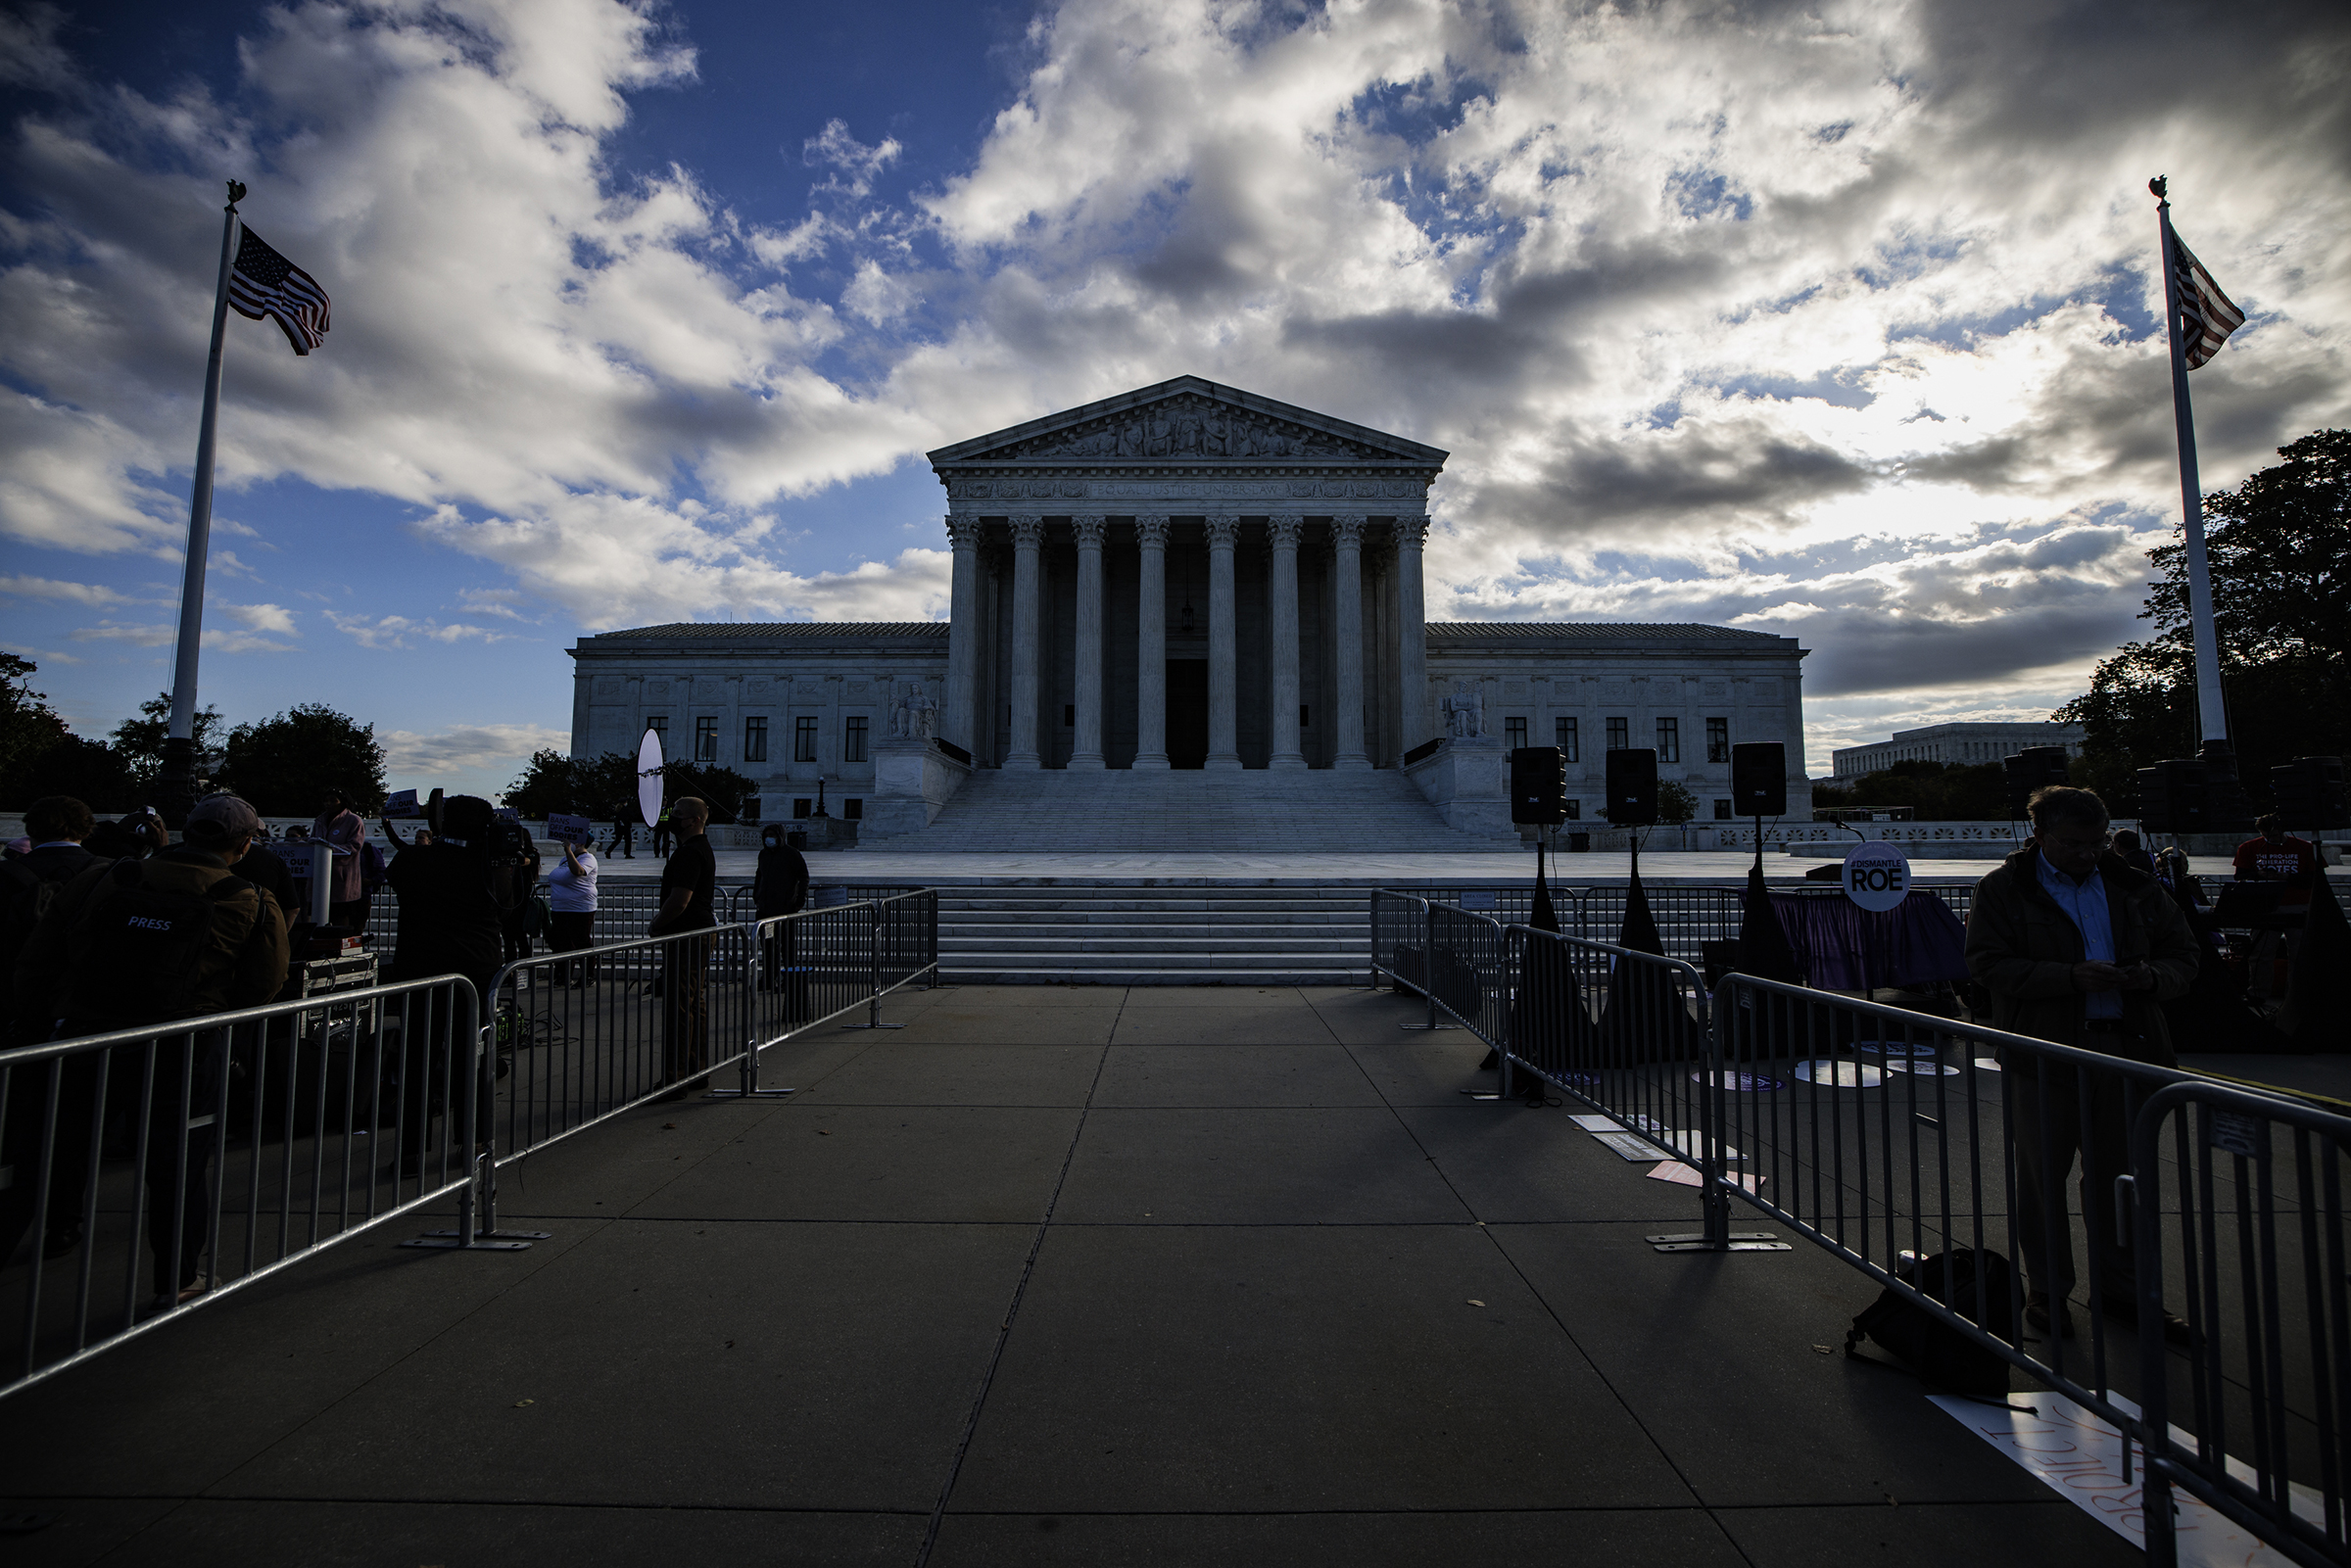 Barricades are set up to separate pro-choice and pro-life demonstrators outside of the Supreme Court in Washington, D.C., on Nov. 1, 2021. (Samuel Corum—Bloomberg/Getty Images)